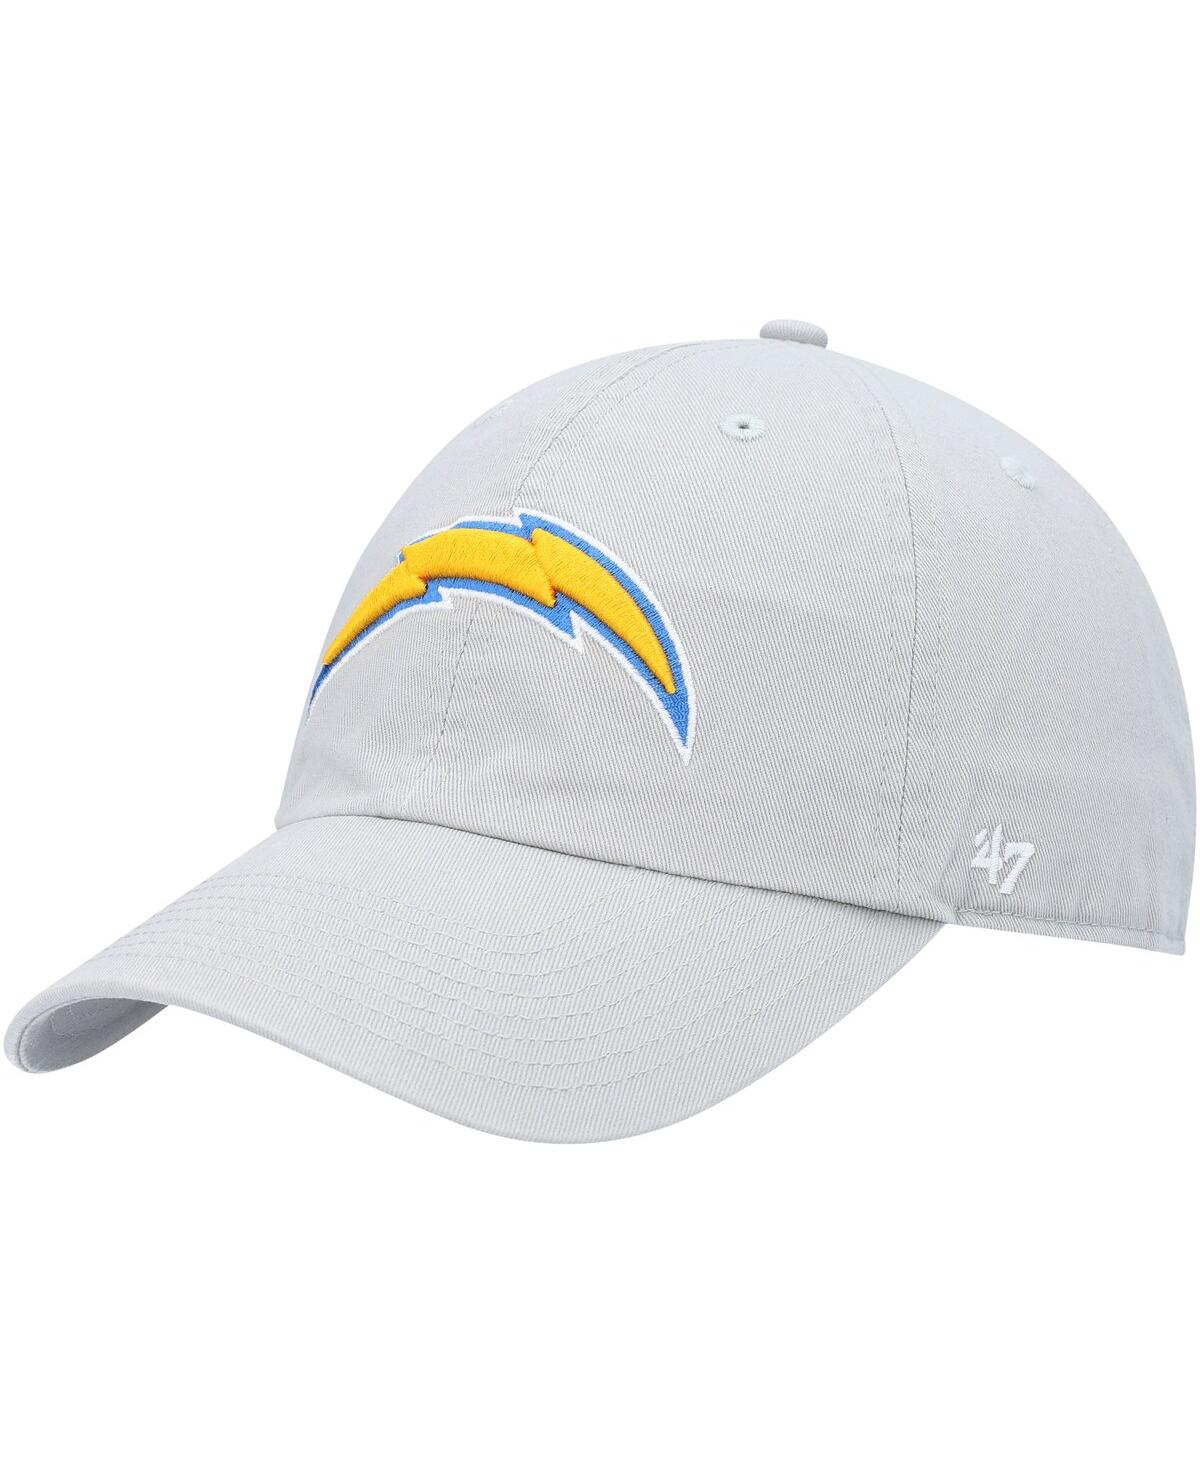 47 Brand Men's '47 Gray Los Angeles Chargers Clean Up Adjustable Hat